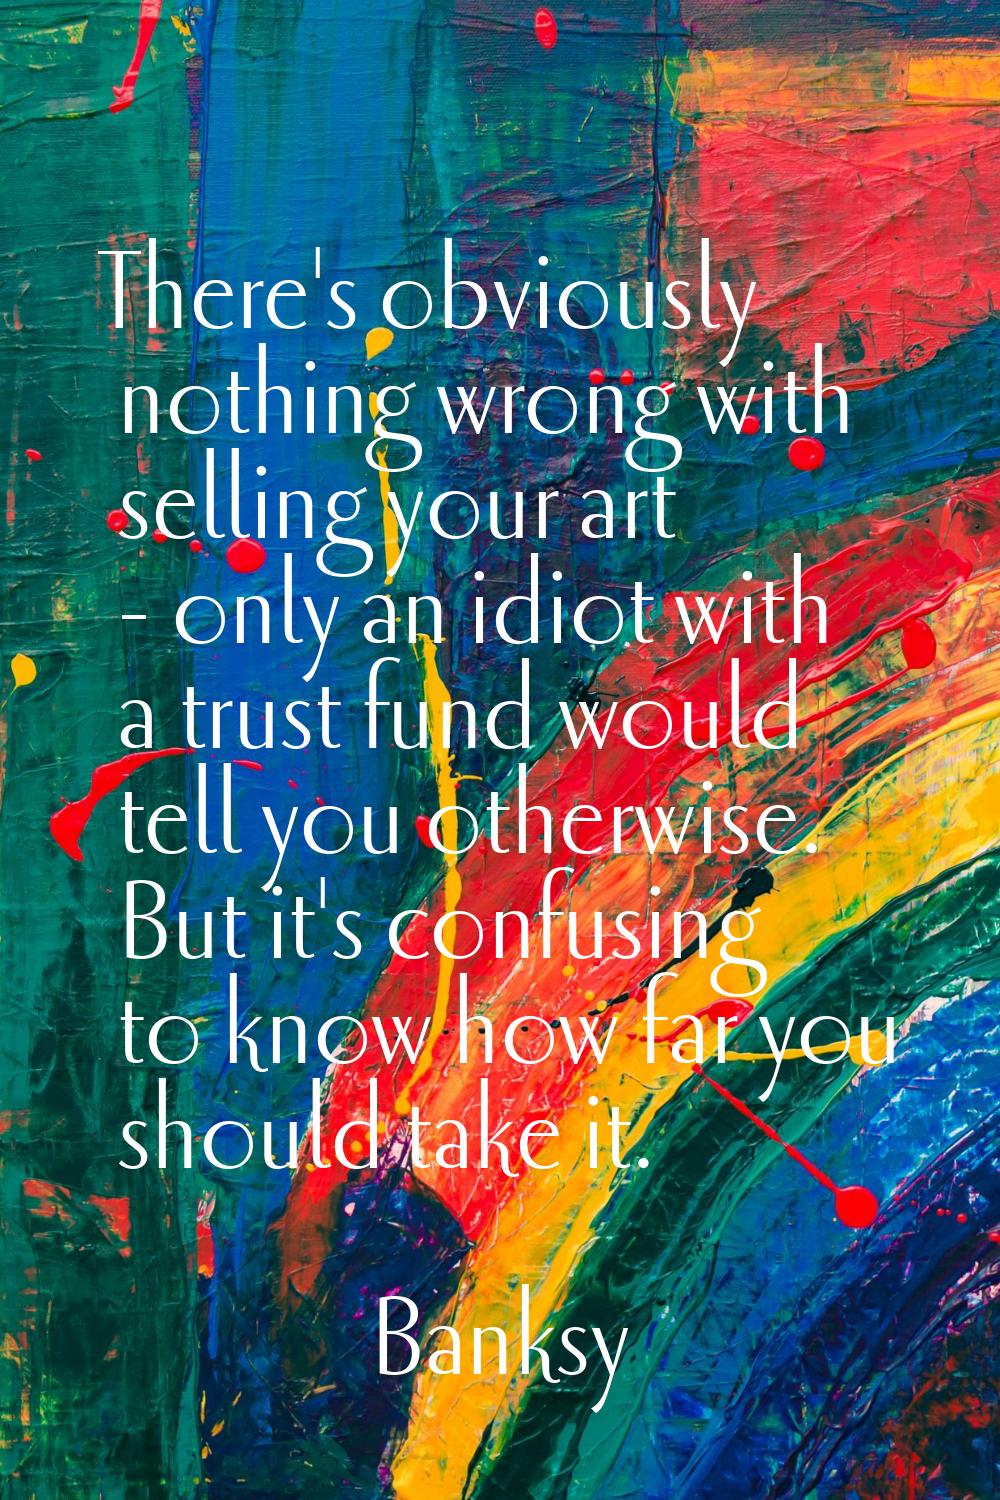 There's obviously nothing wrong with selling your art - only an idiot with a trust fund would tell 